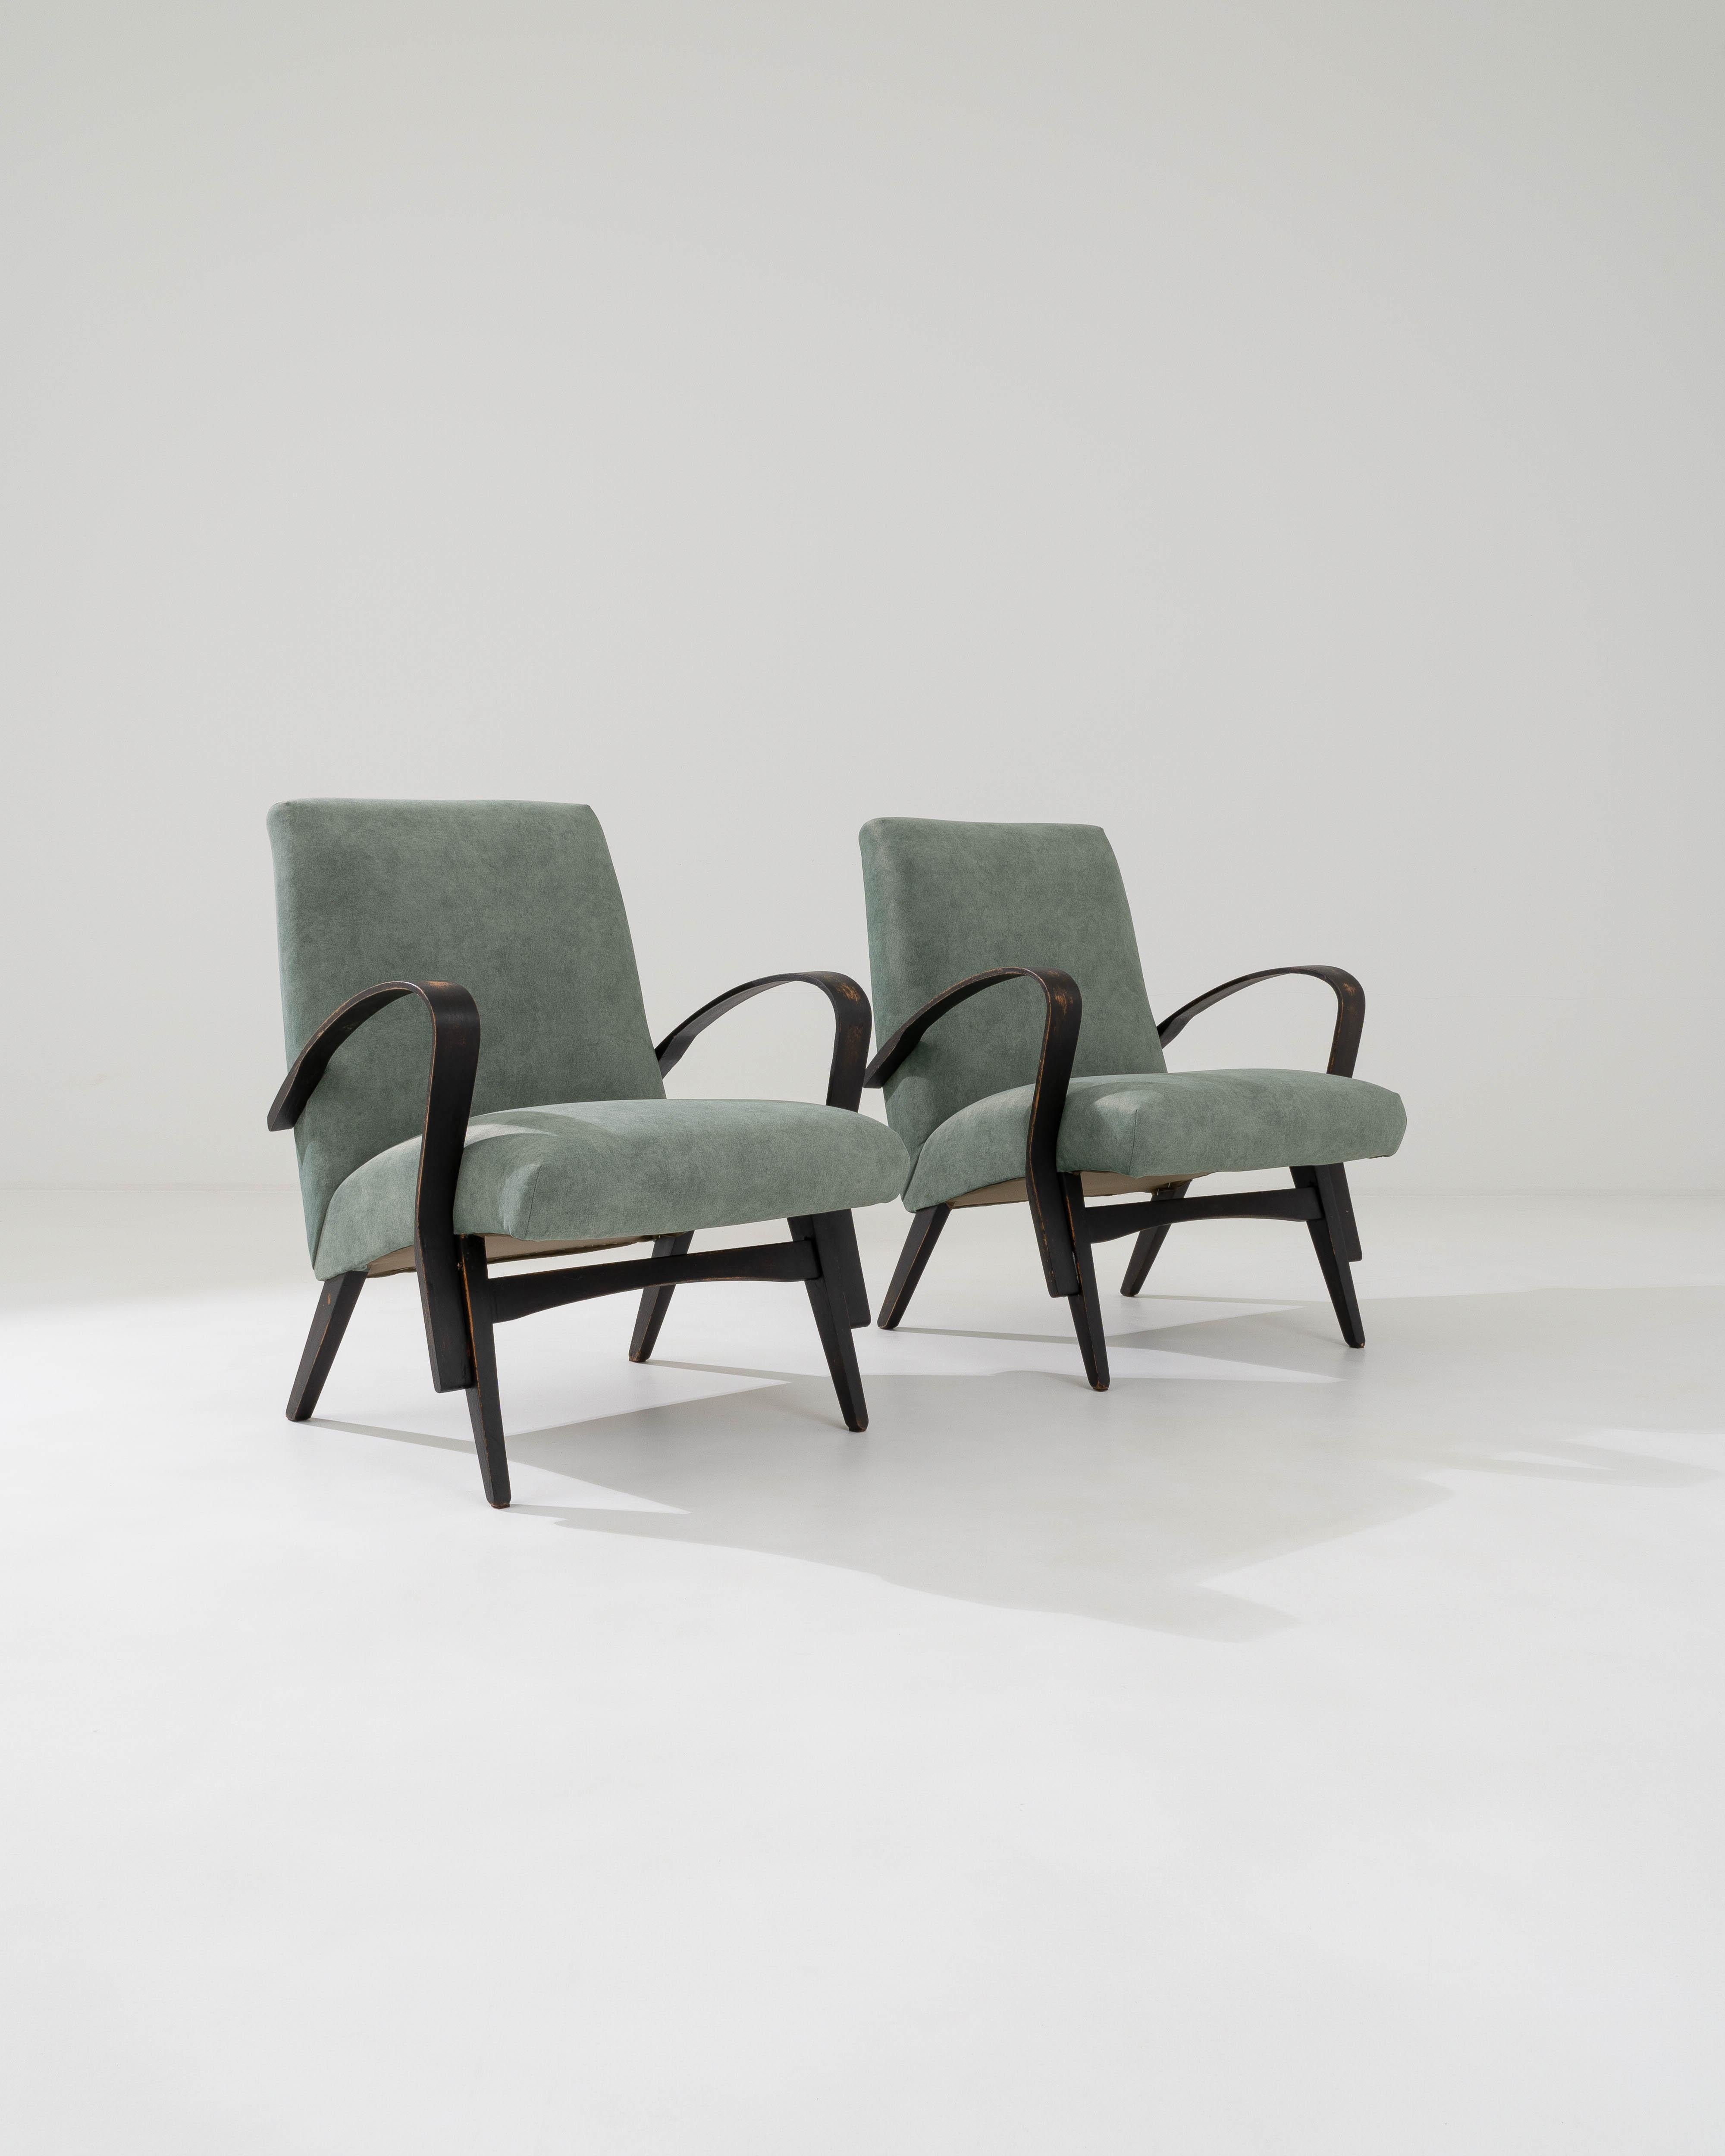 Characterized by the clean lines that define their minimalist silhouette, these armchairs were crafted by the iconic Czech brand in the 1960s. The smooth, contoured surfaces of the bentwood arms engage in a captivating dialogue with the artistically